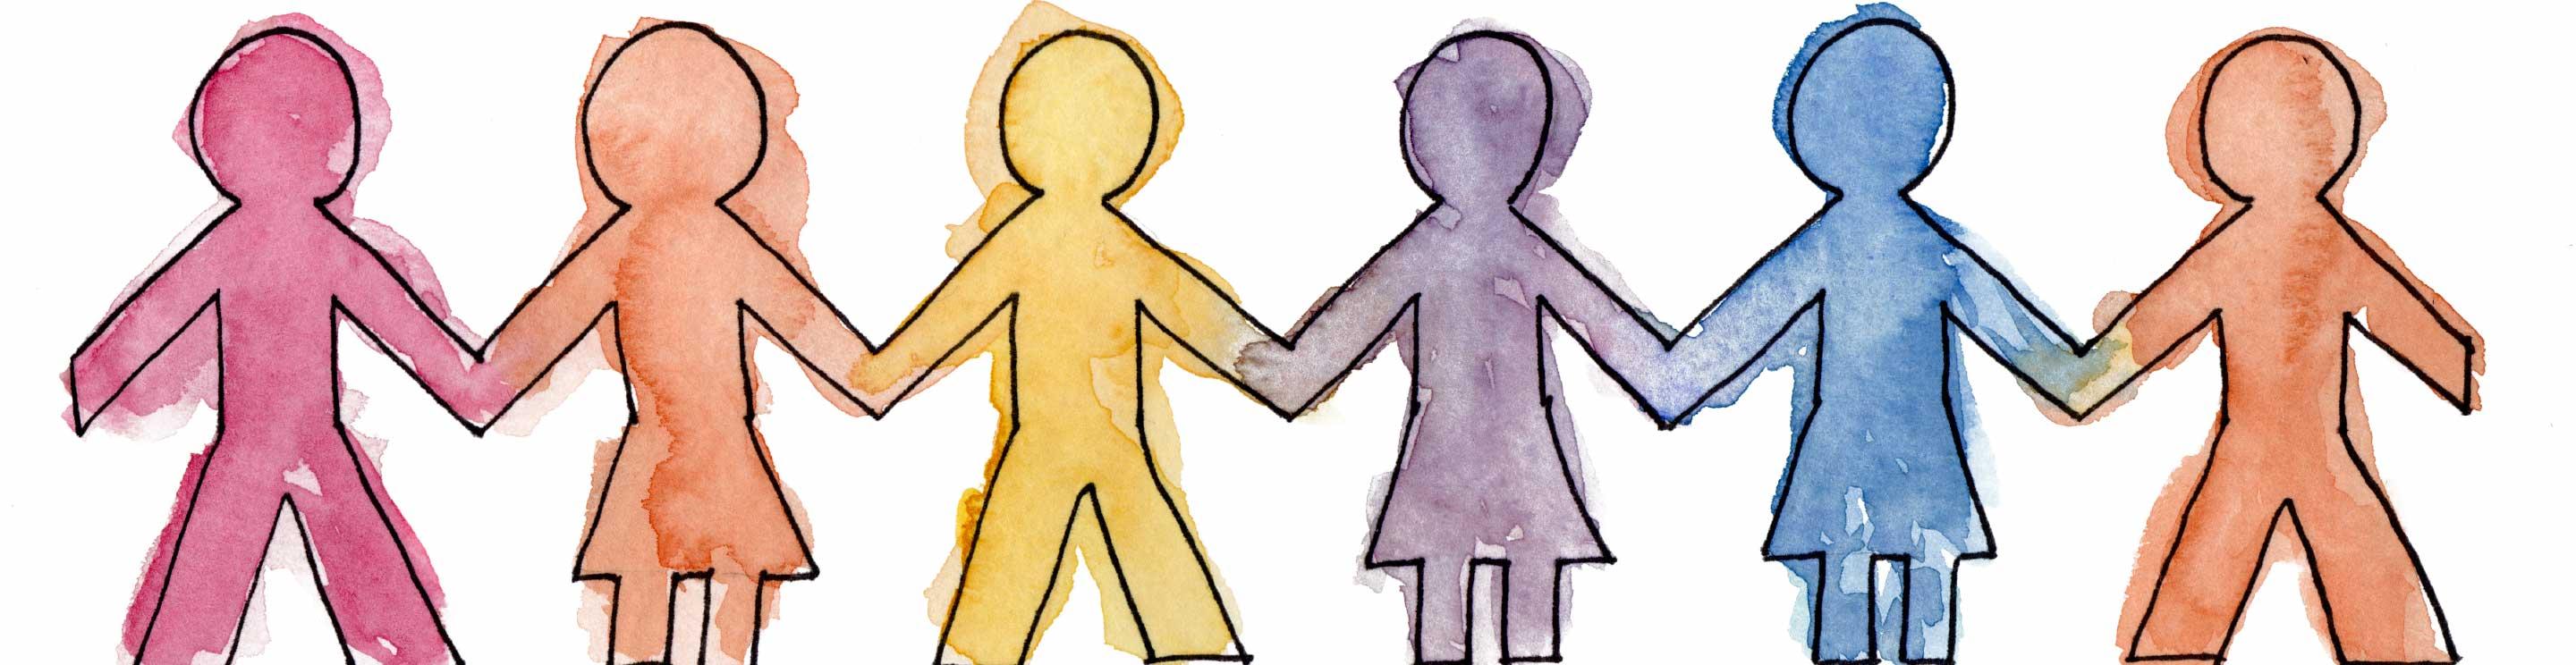 Multicolored paper doll cutouts holding hands